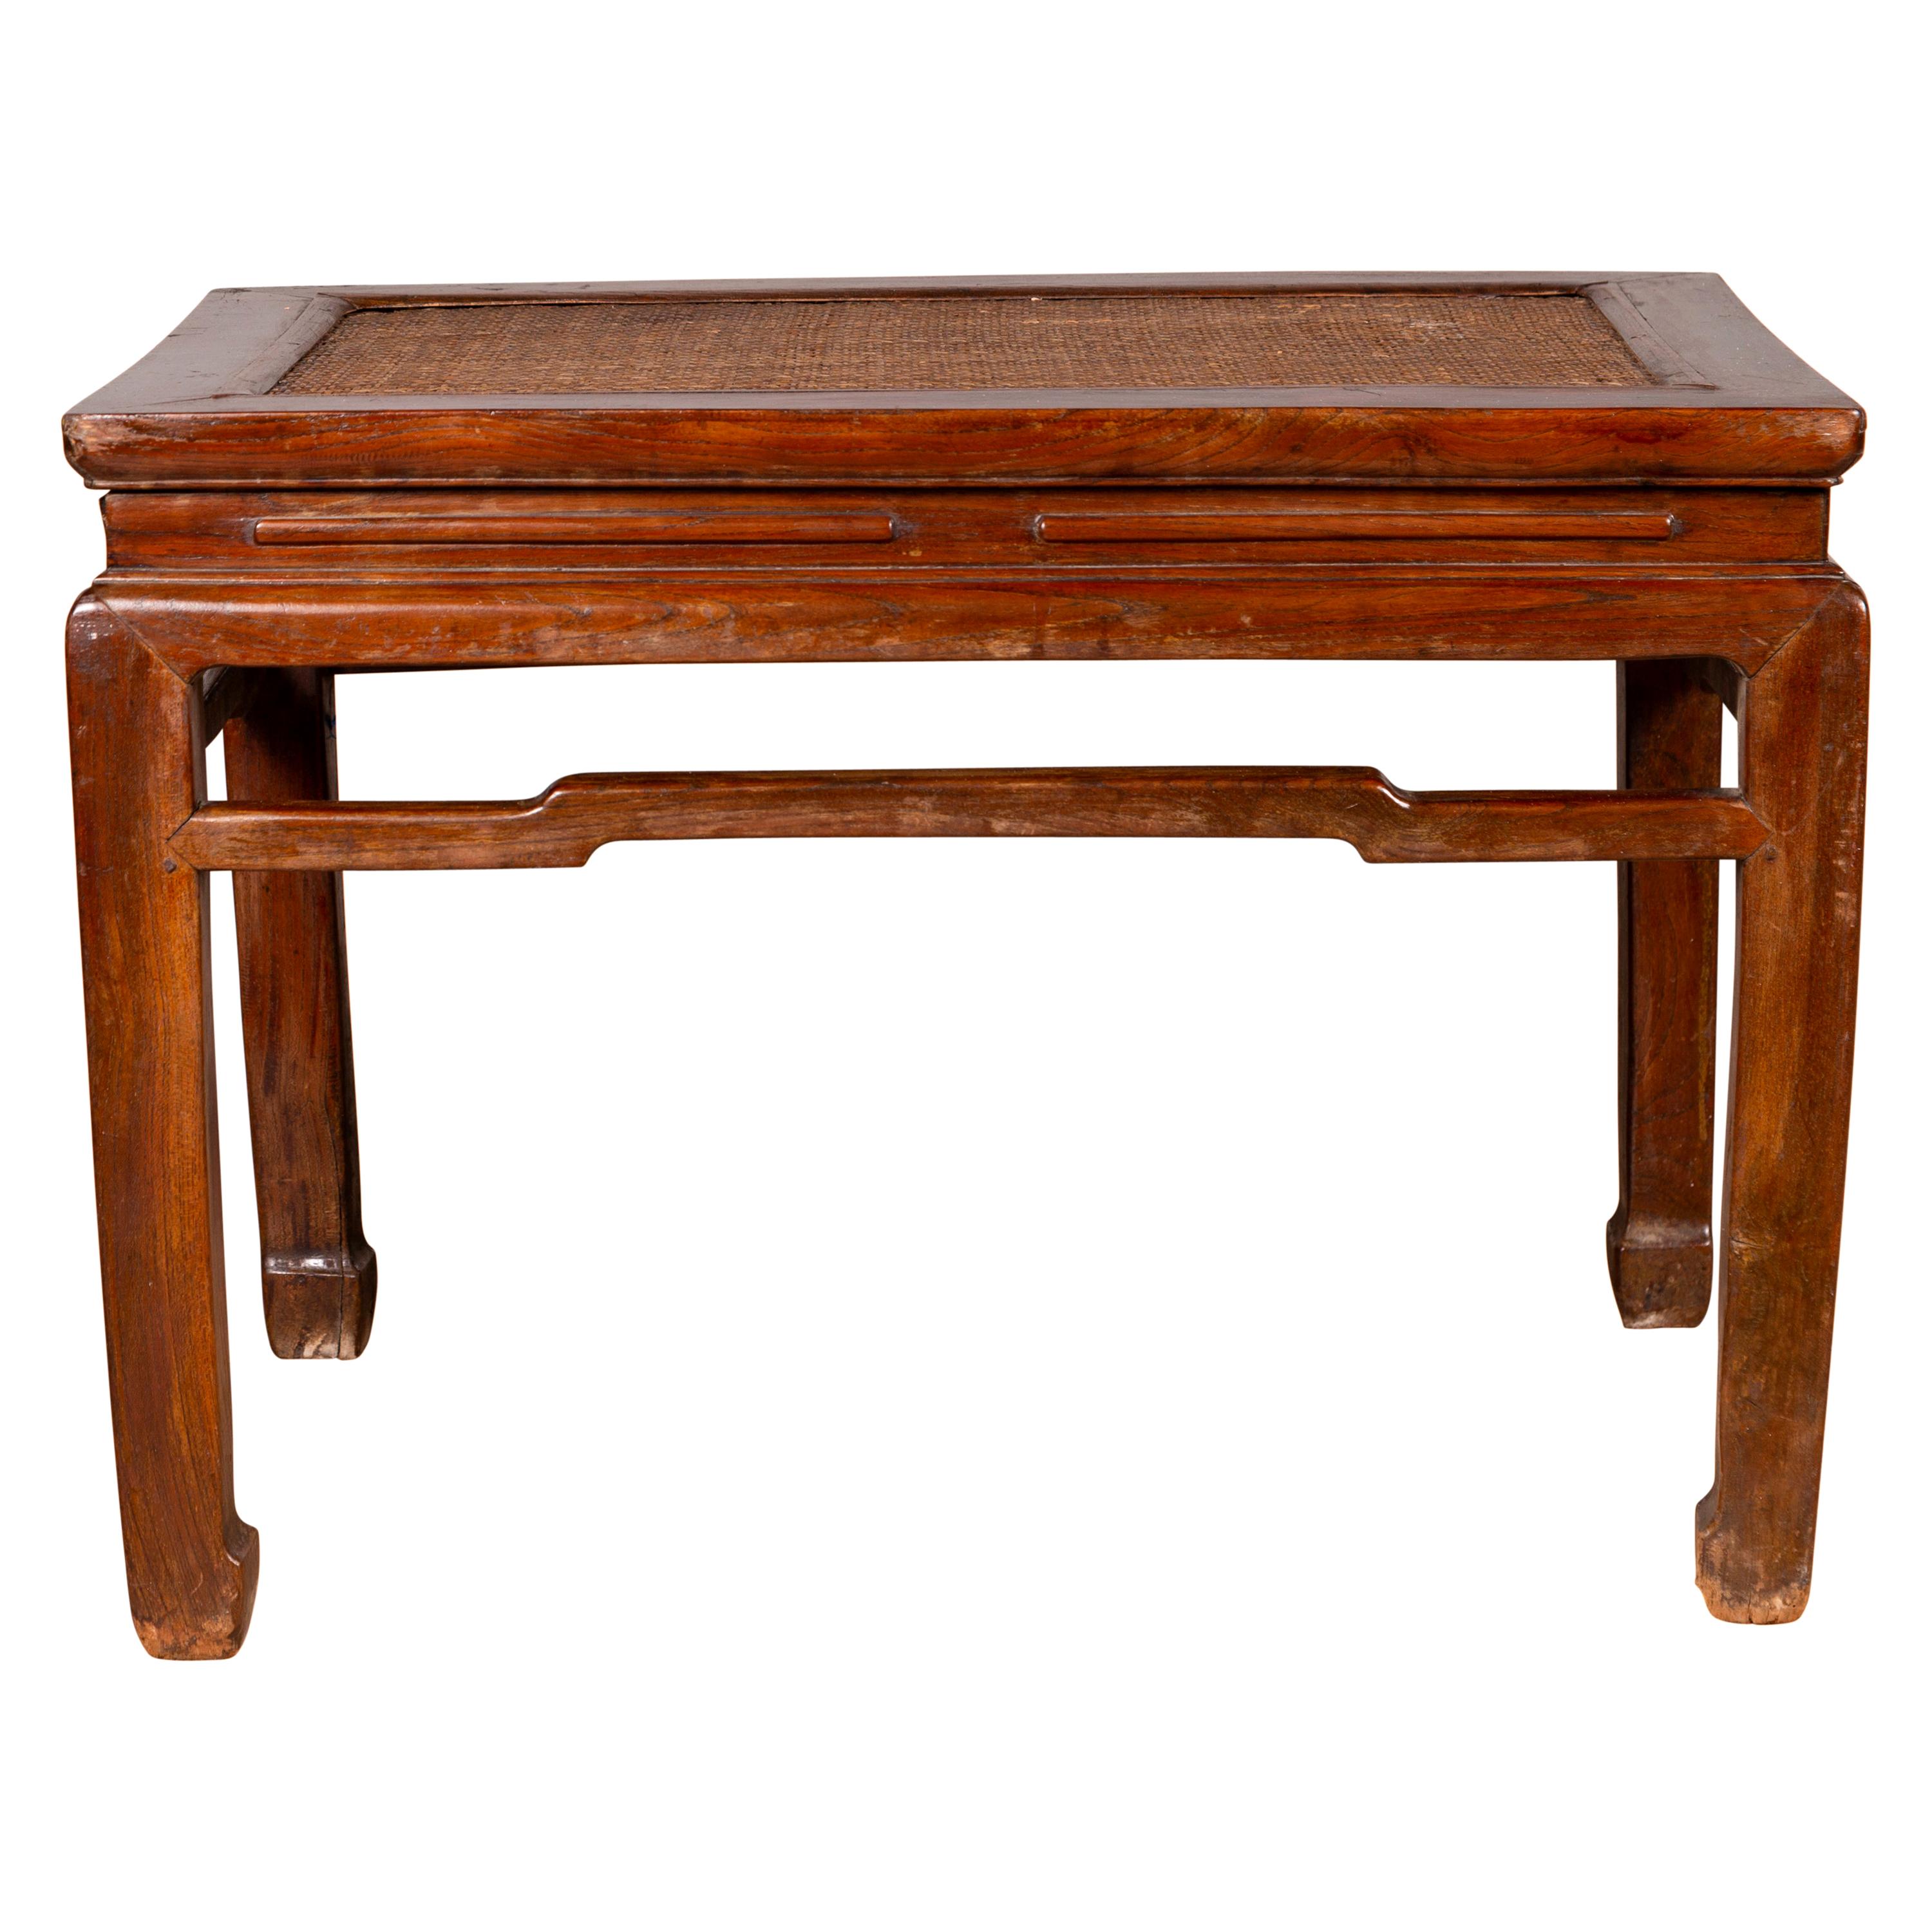 Antique Chinese Ming Dynasty Style Waisted Side Table with Woven Rattan Top For Sale